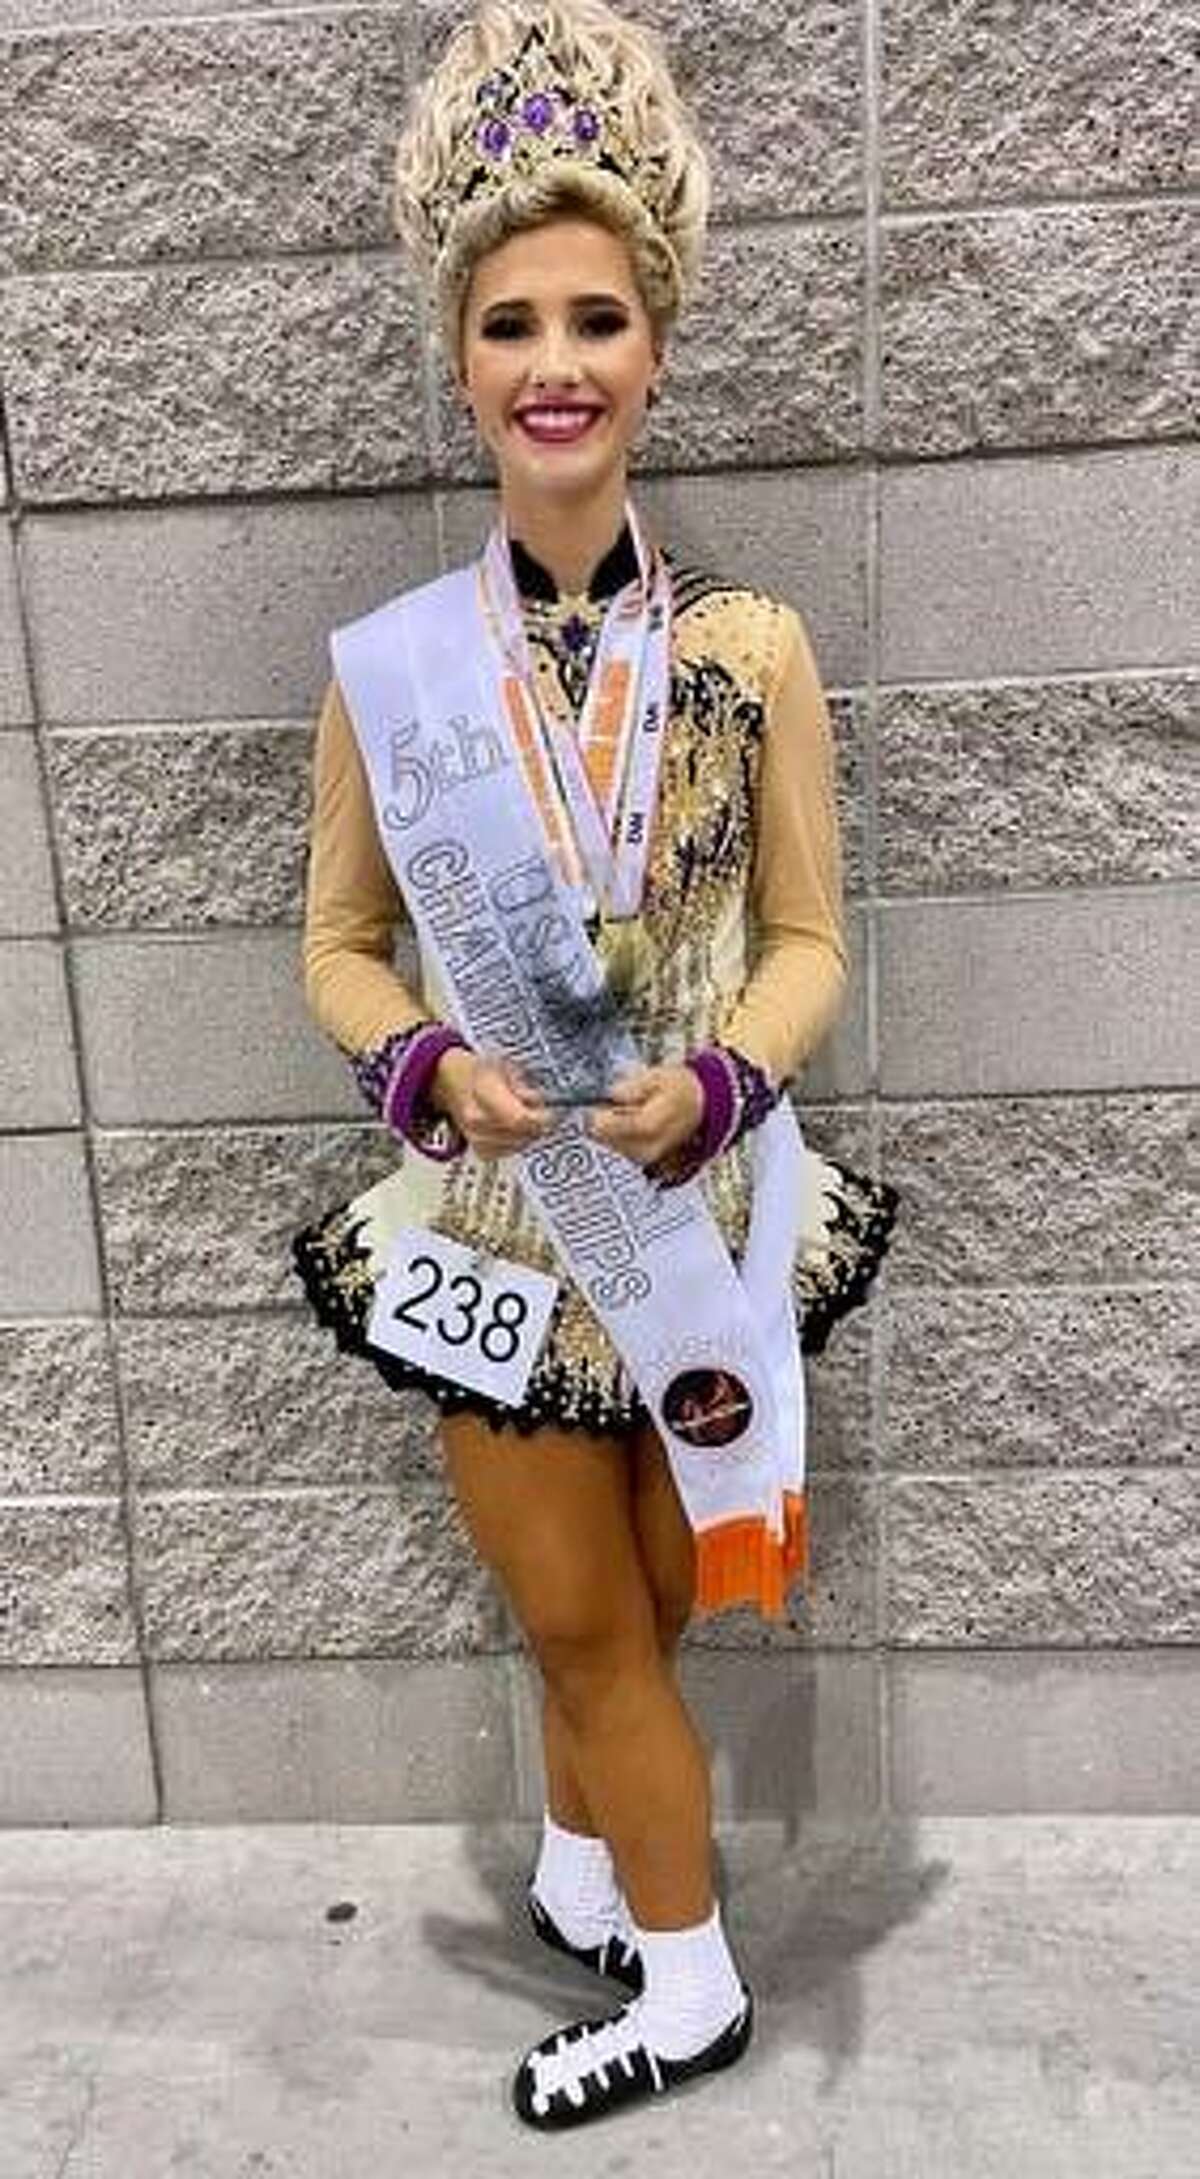 Stamford resident Erin Dixon finished fifth in the under-16 category at the National Irish Dance Championships in July.